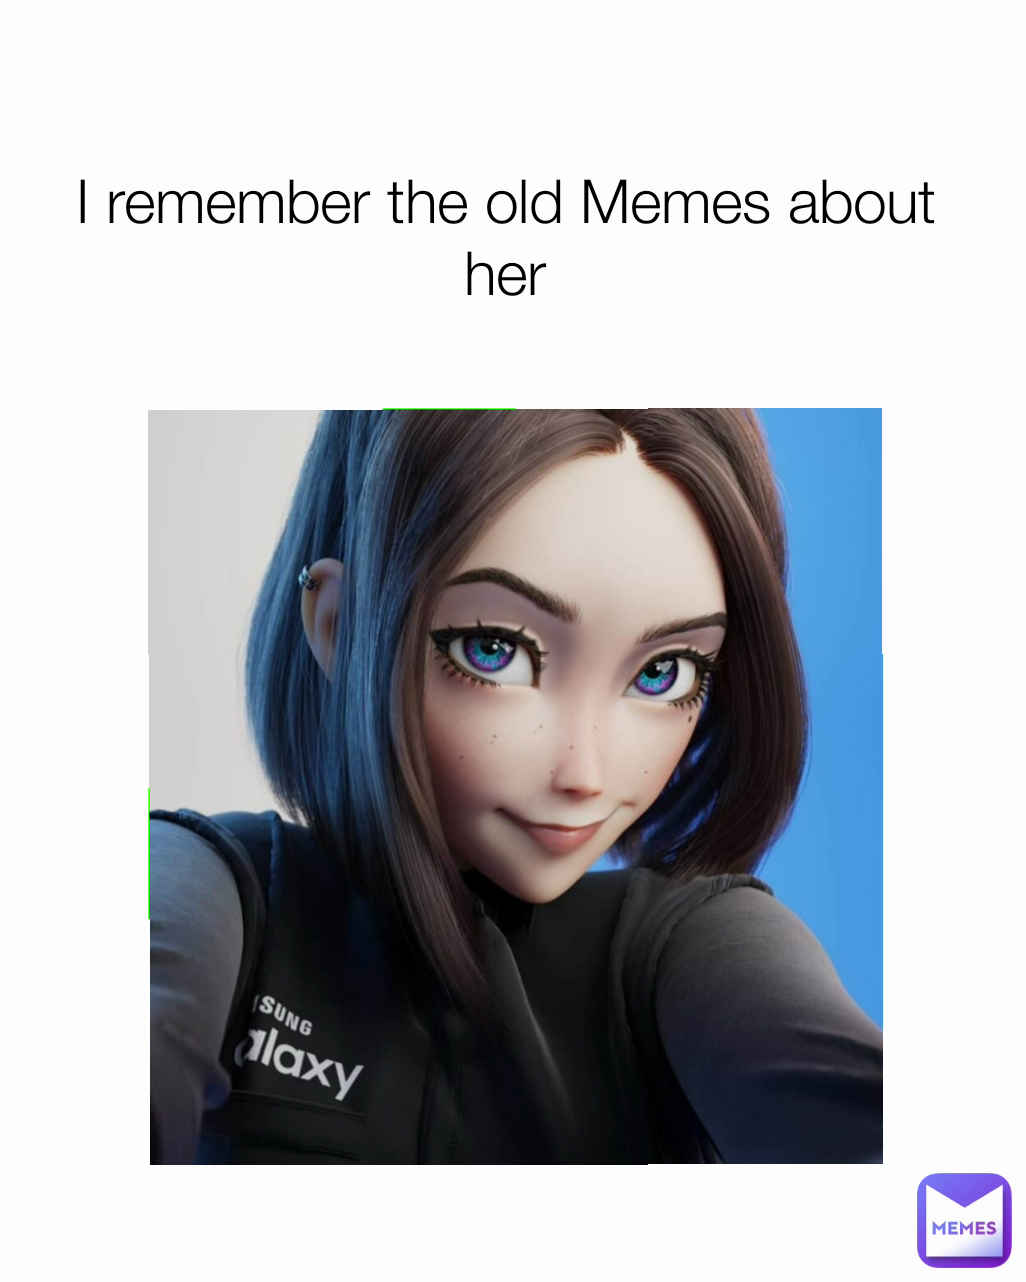 I remember the old Memes about her